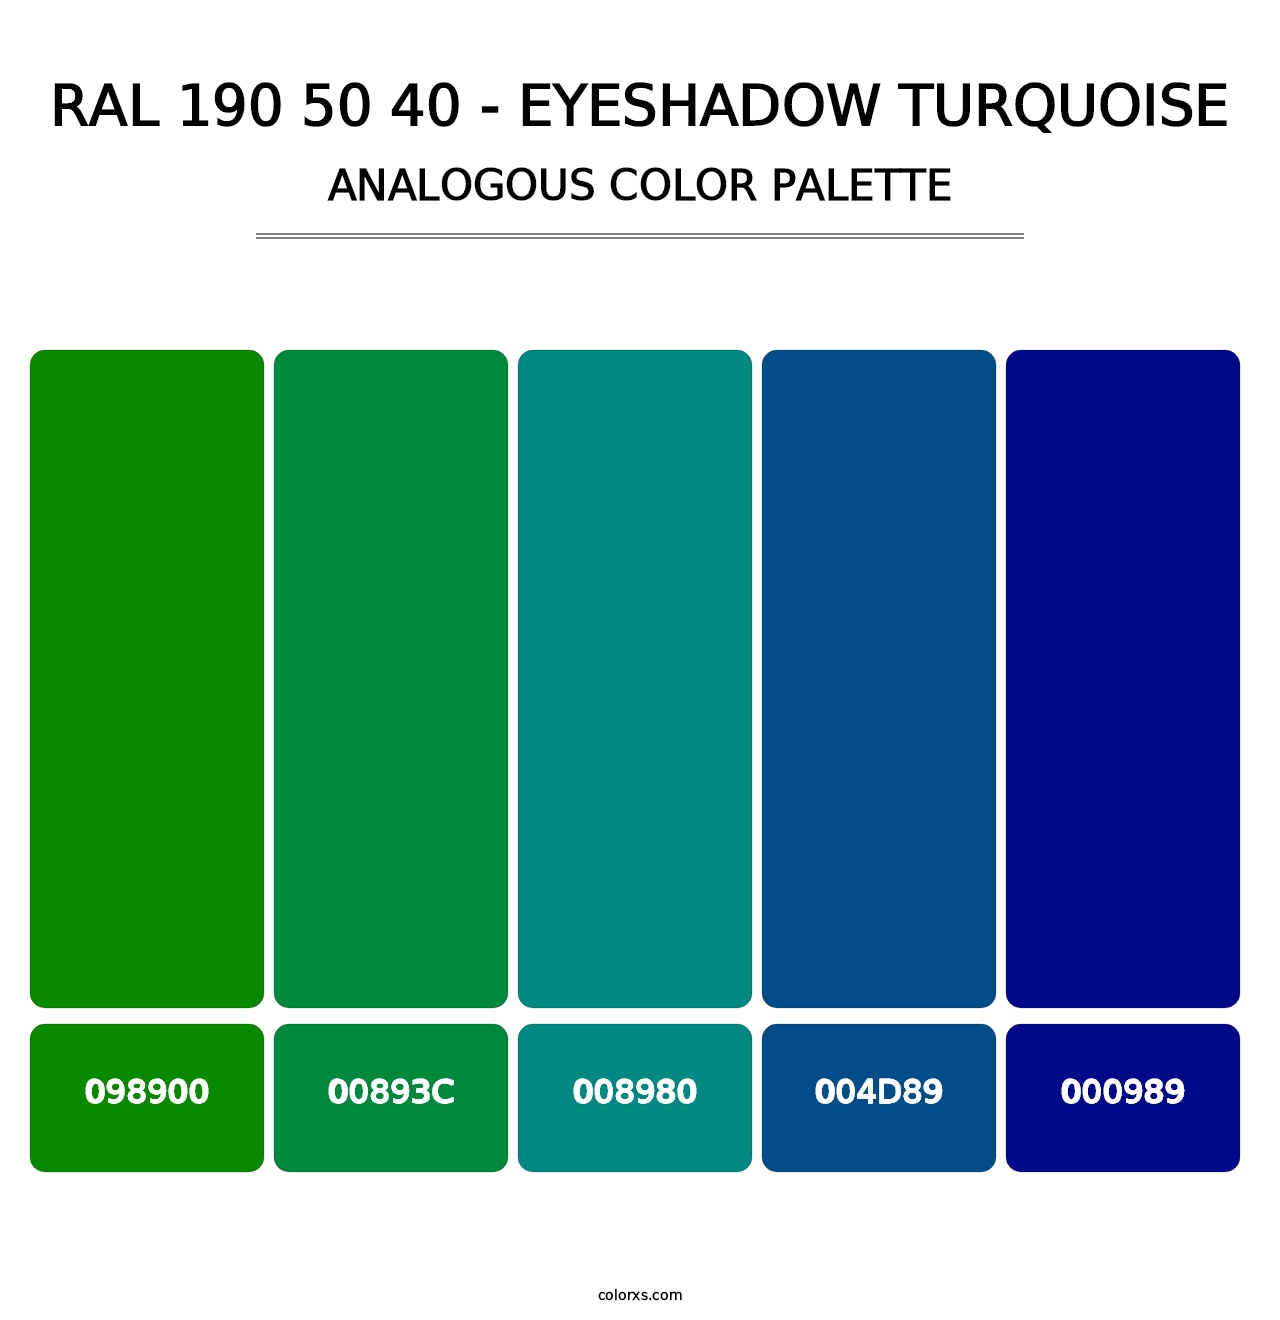 RAL 190 50 40 - Eyeshadow Turquoise - Analogous Color Palette